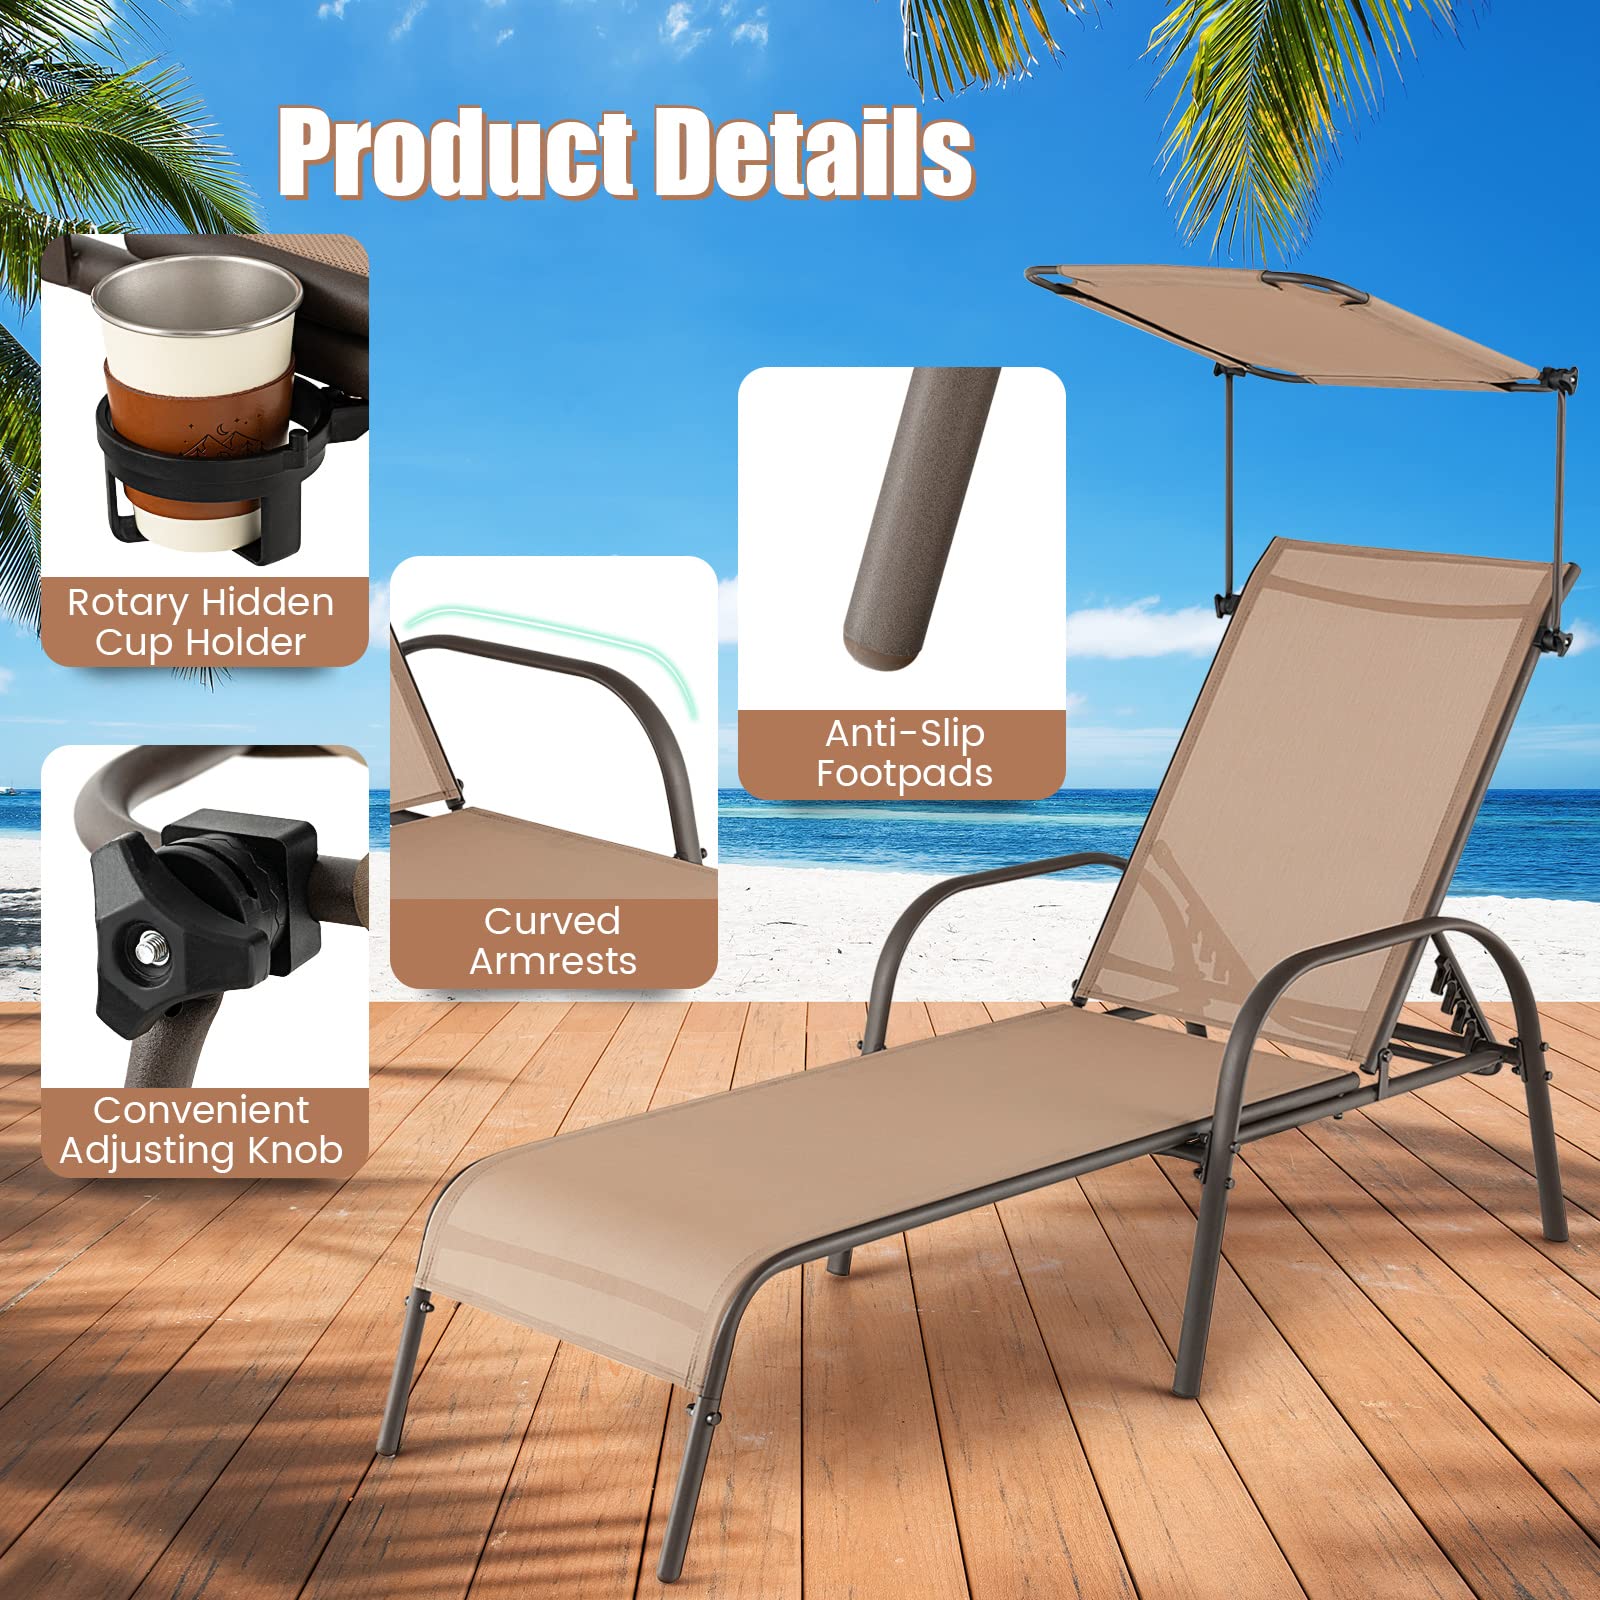 Giantex Patio Chaise Lounge Chair - Outdoor Beach Chair with Adjustable Canopy, Metal Frame Sunbathing Lounger for Outside